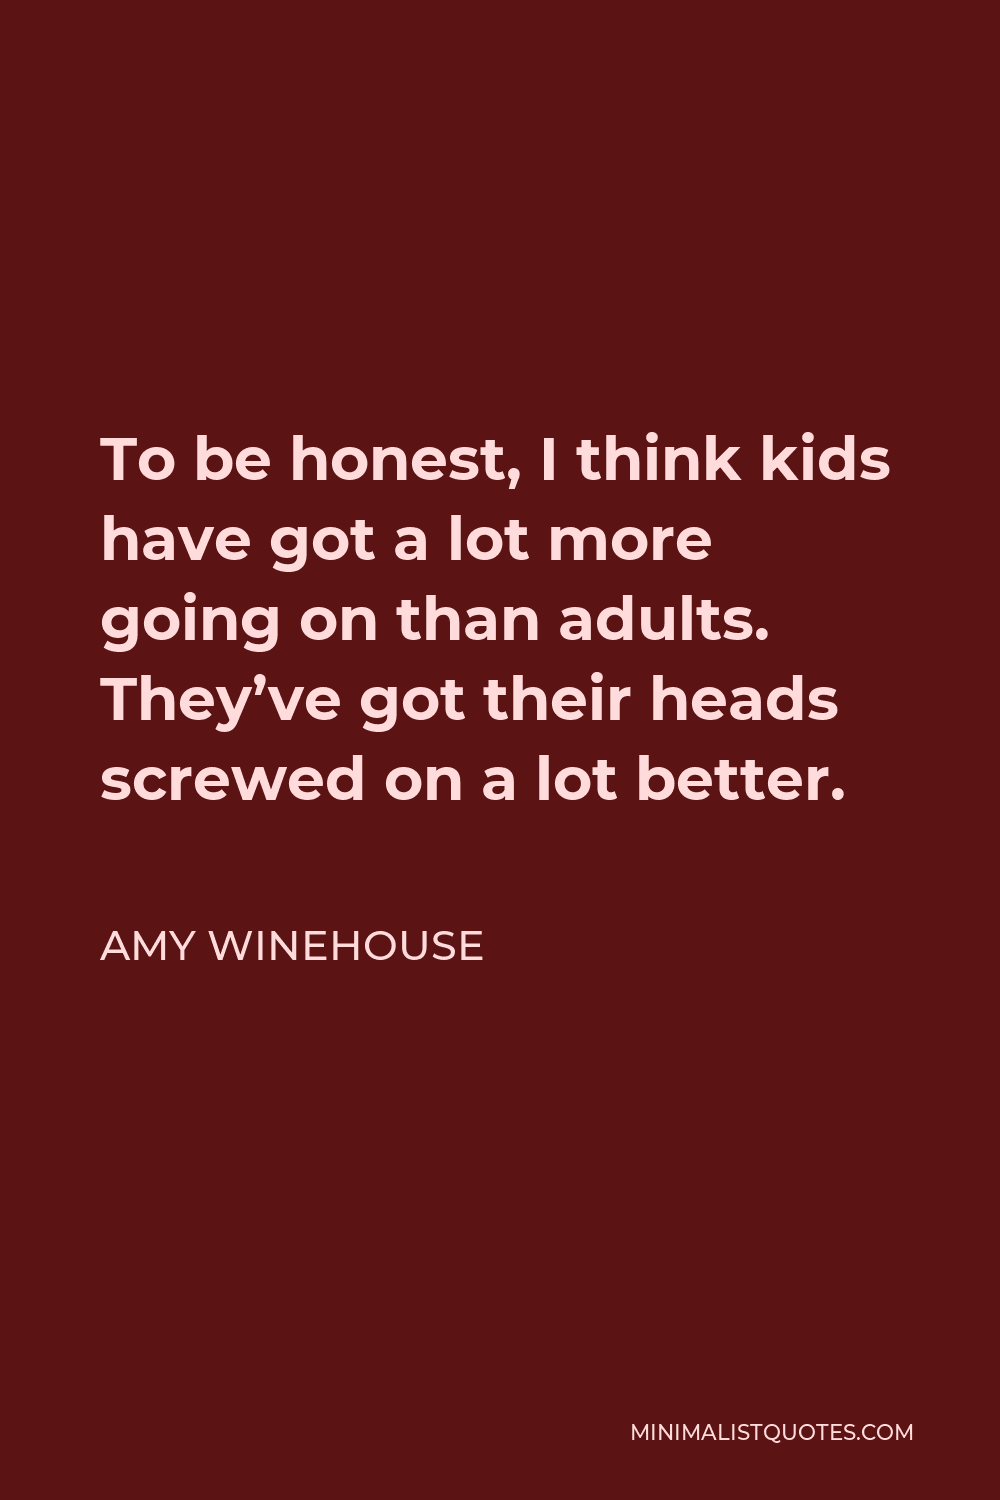 Amy Winehouse Quote - To be honest, I think kids have got a lot more going on than adults. They’ve got their heads screwed on a lot better.